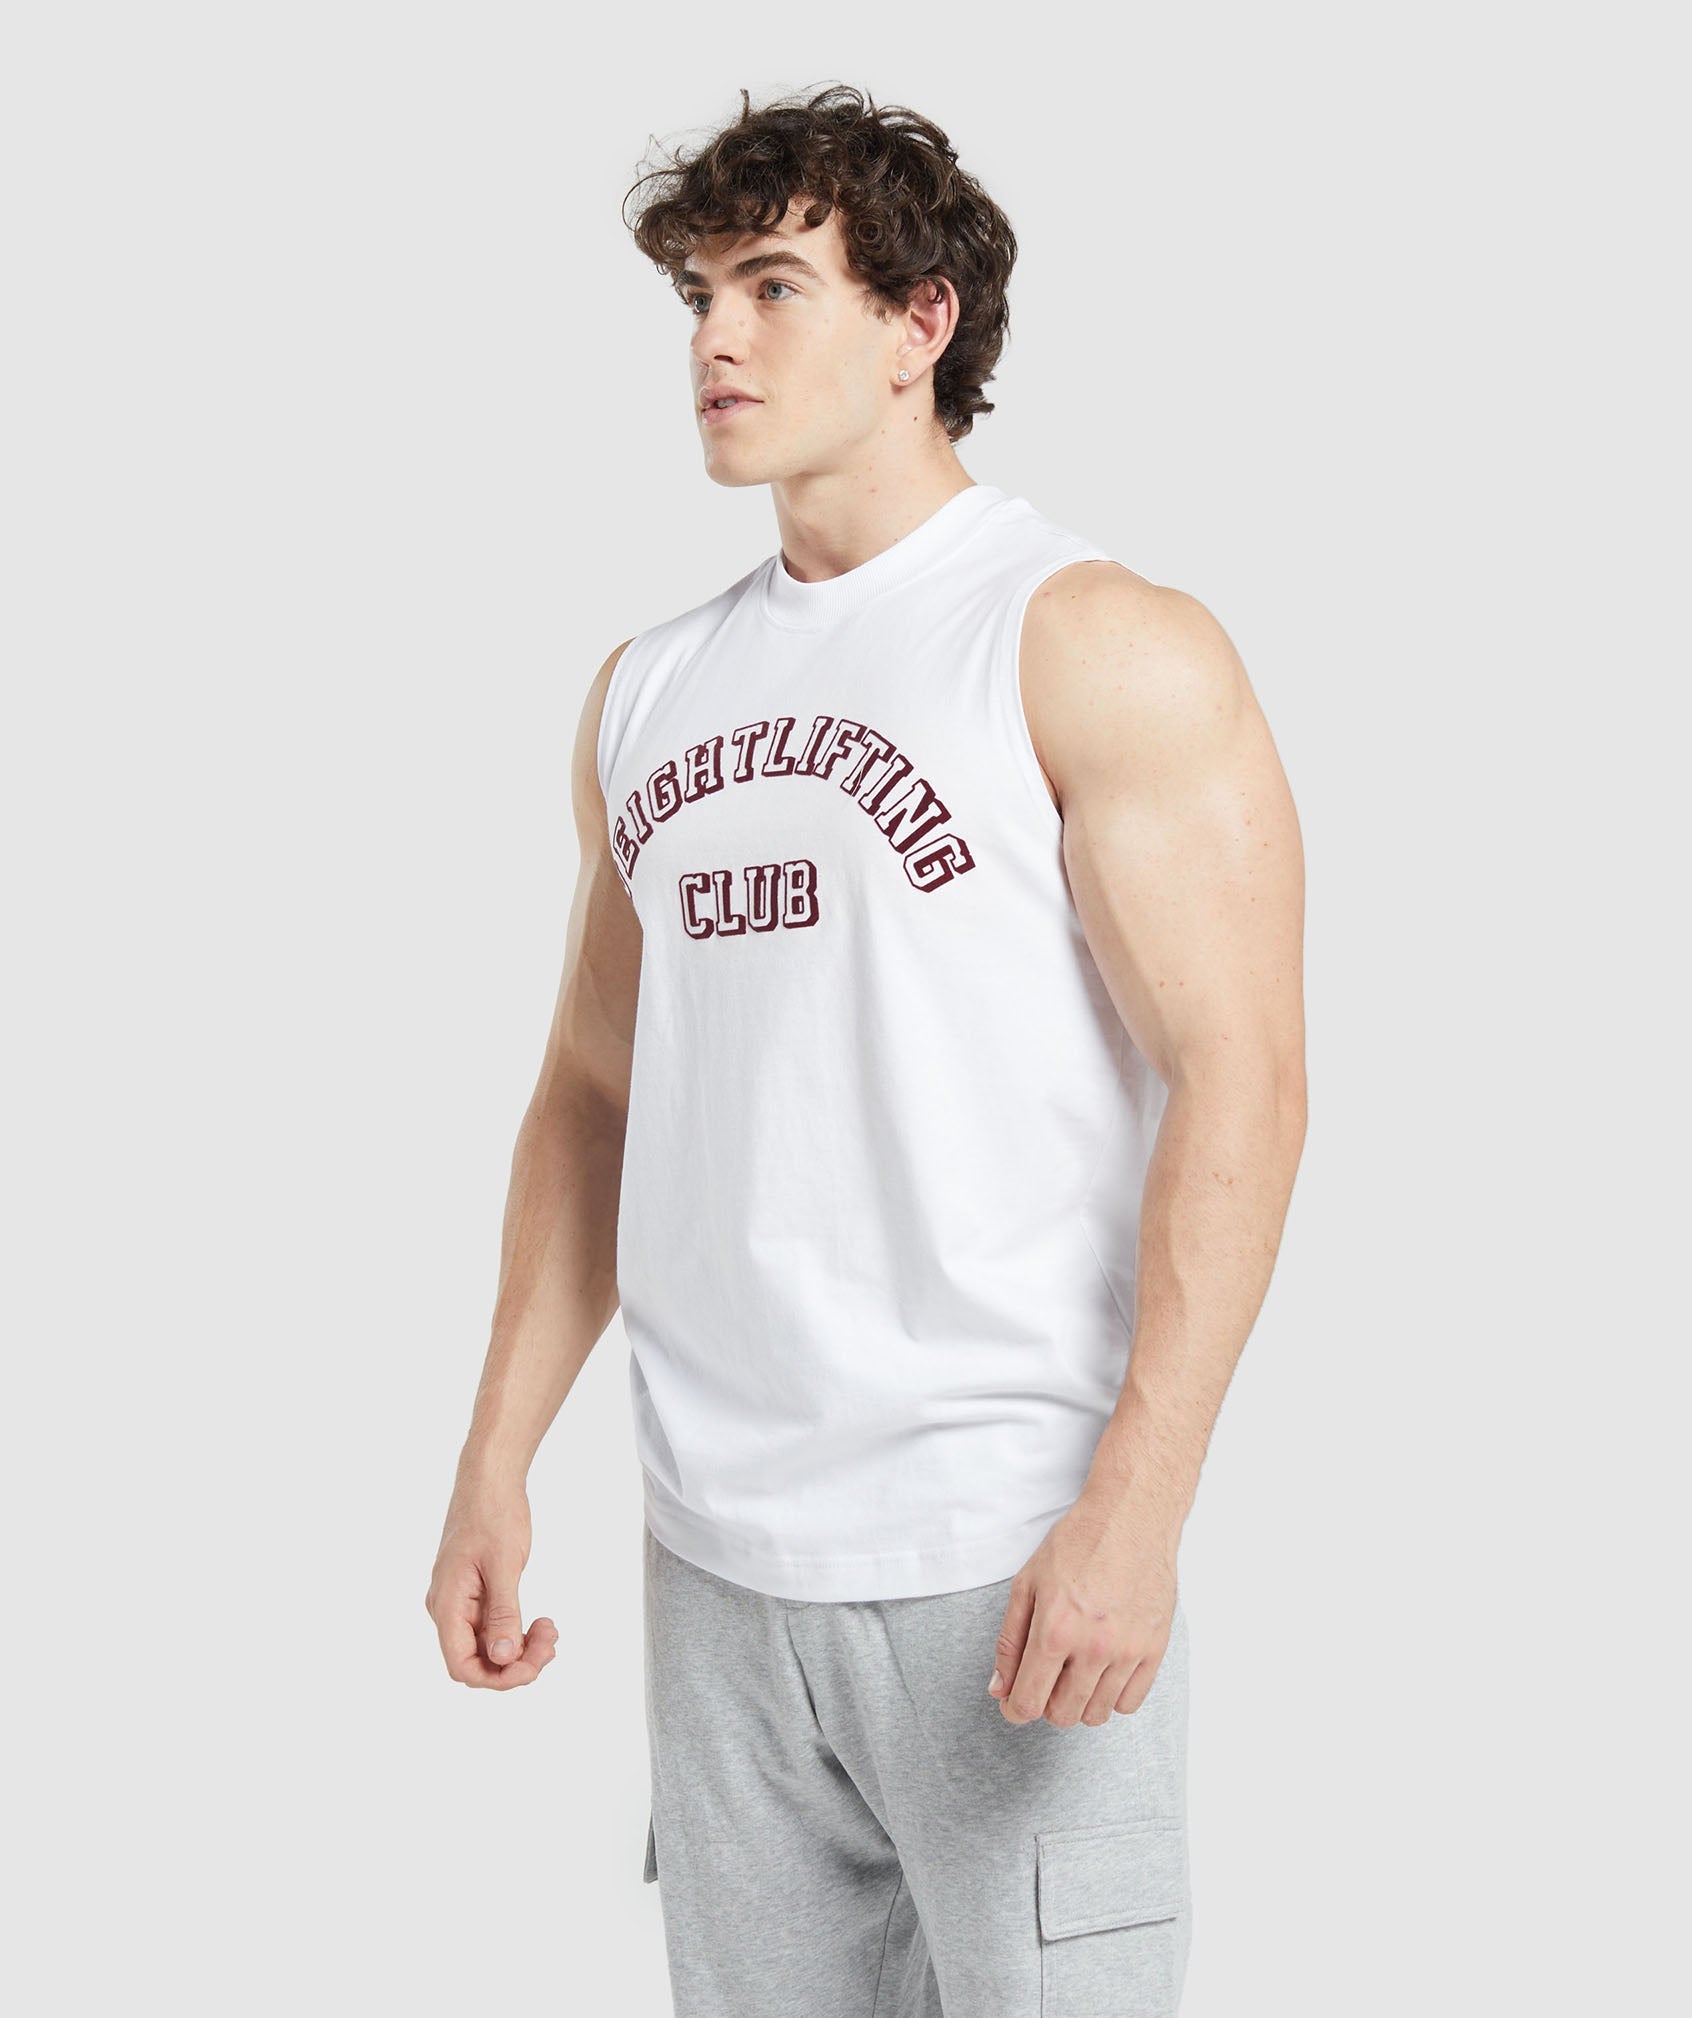 Weightlifting Club Tank in White - view 3